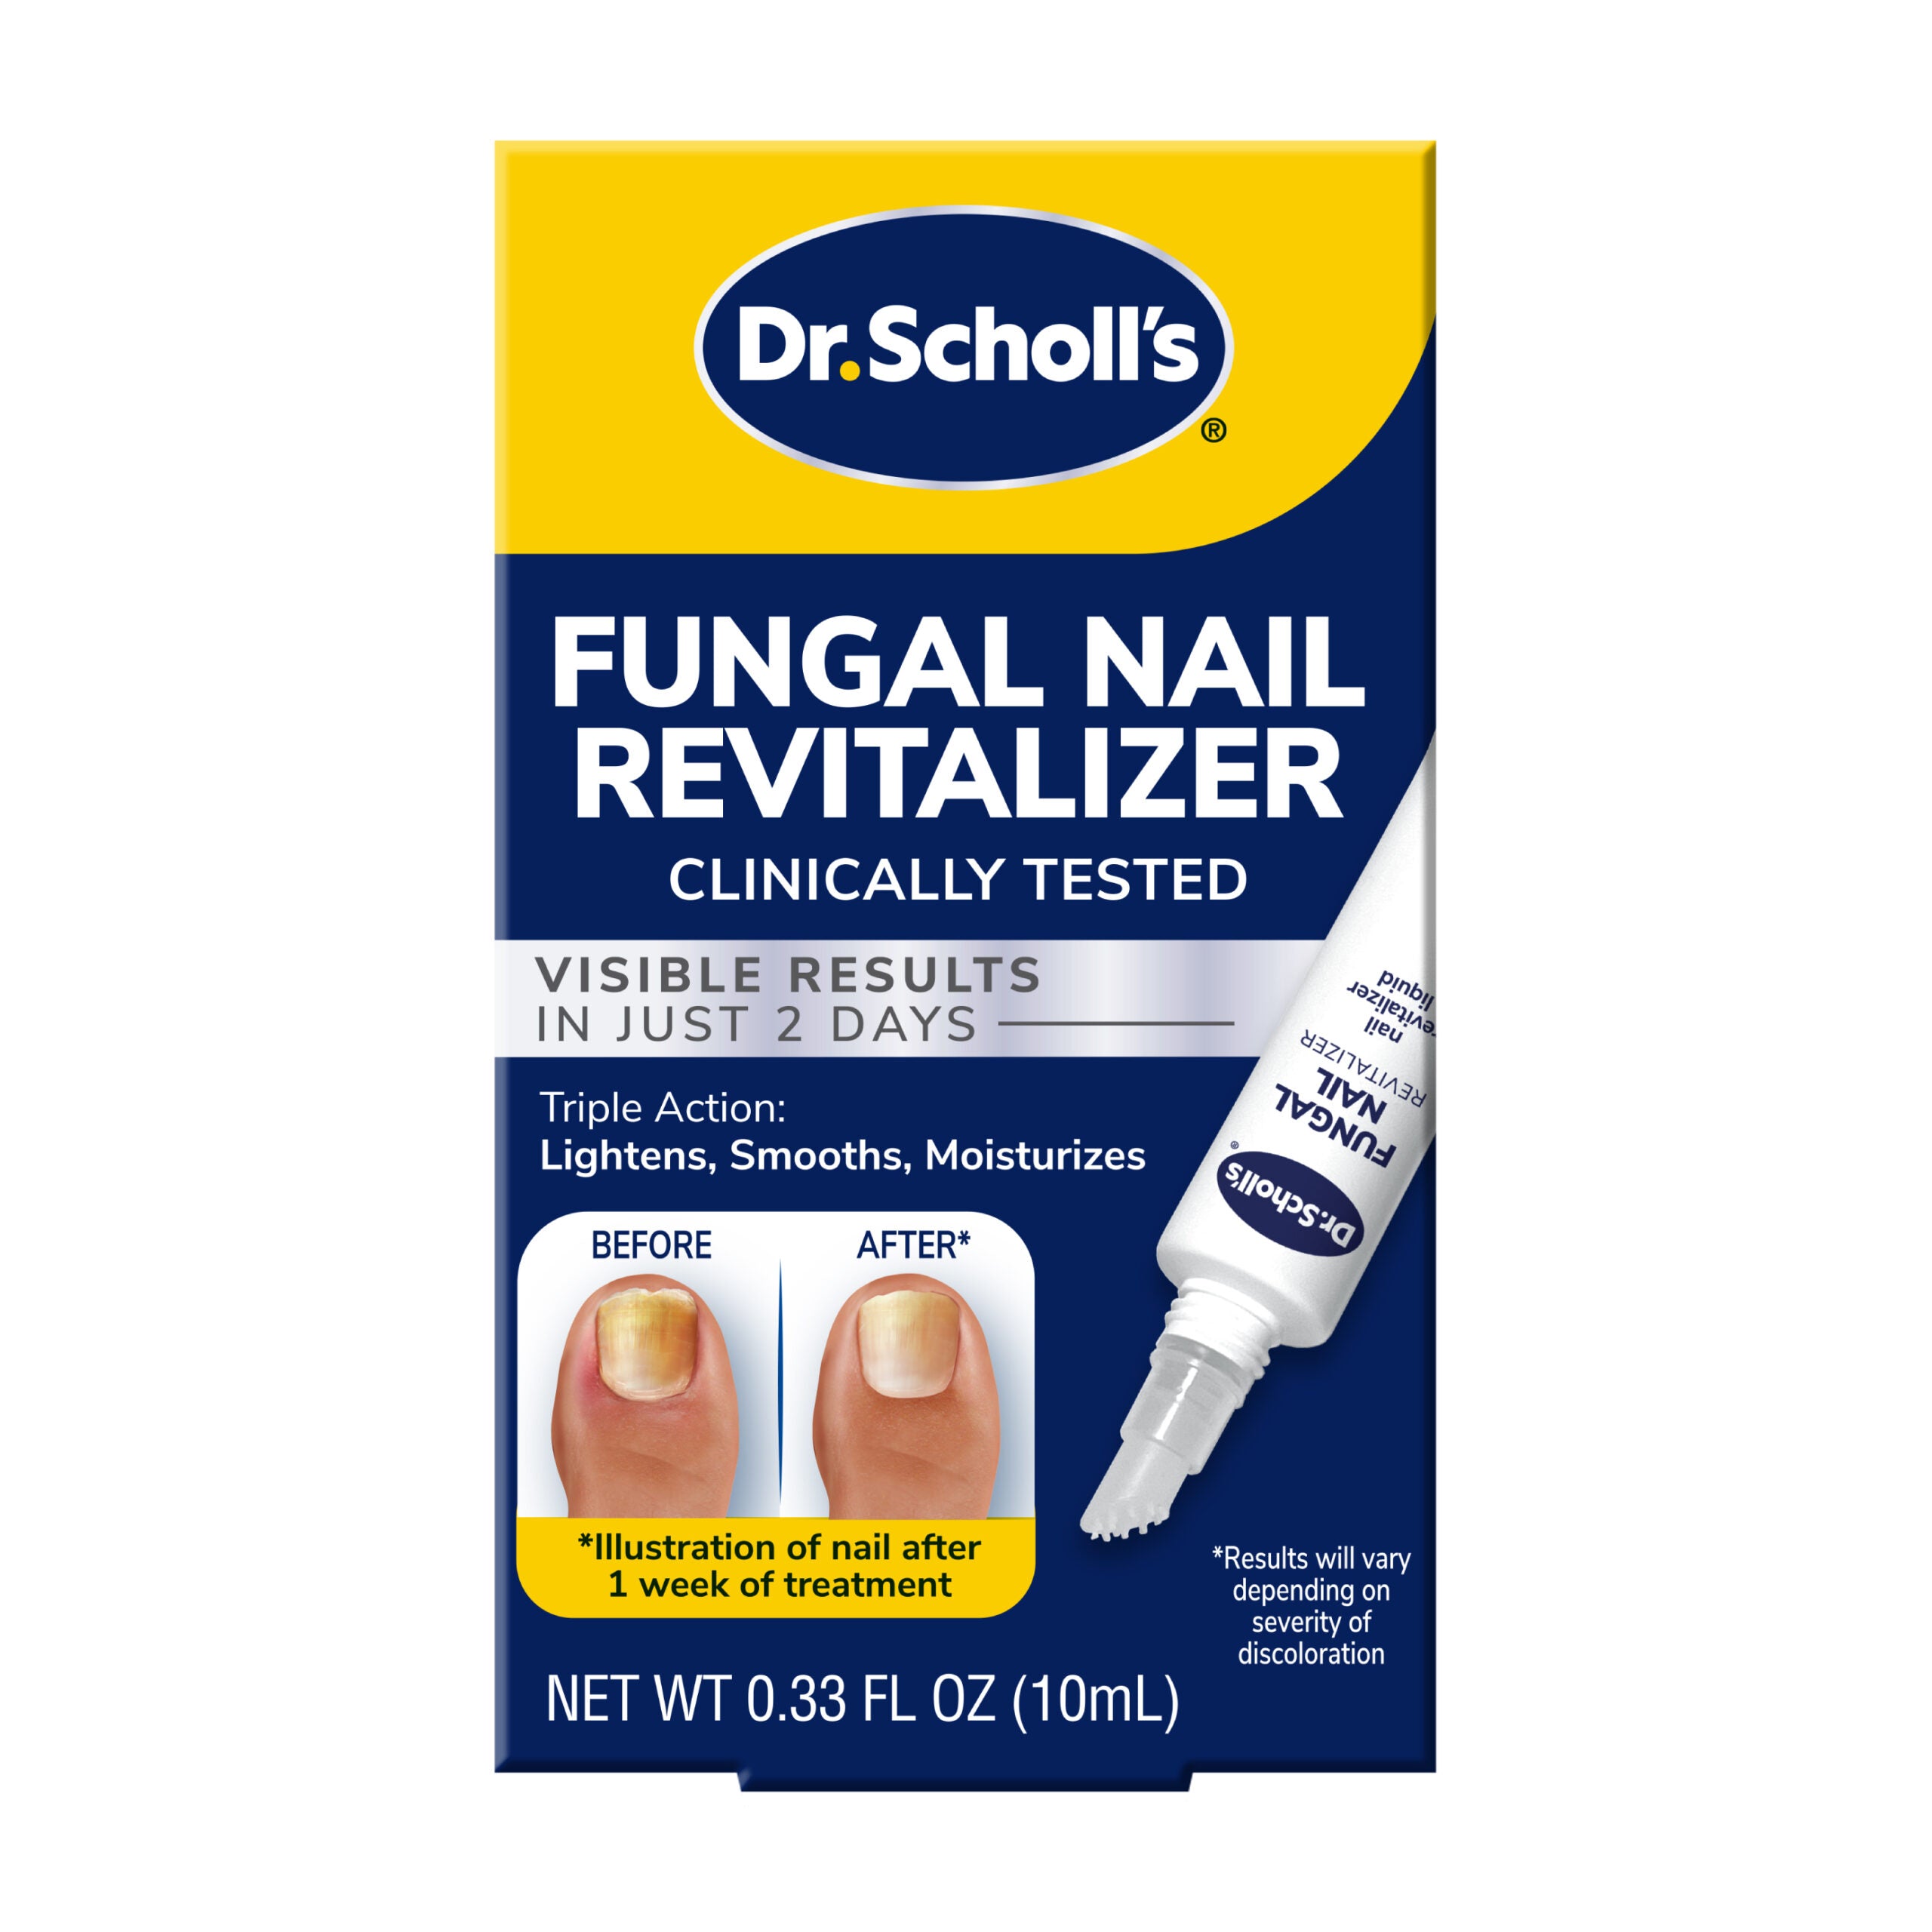 The Point - An ingrowing toenail can cause a lot of discomfort in your  daily routine, especially when wearing tight shoes. Now, you can treat it  yourself, at home with#Scholl ingrowing toenail.